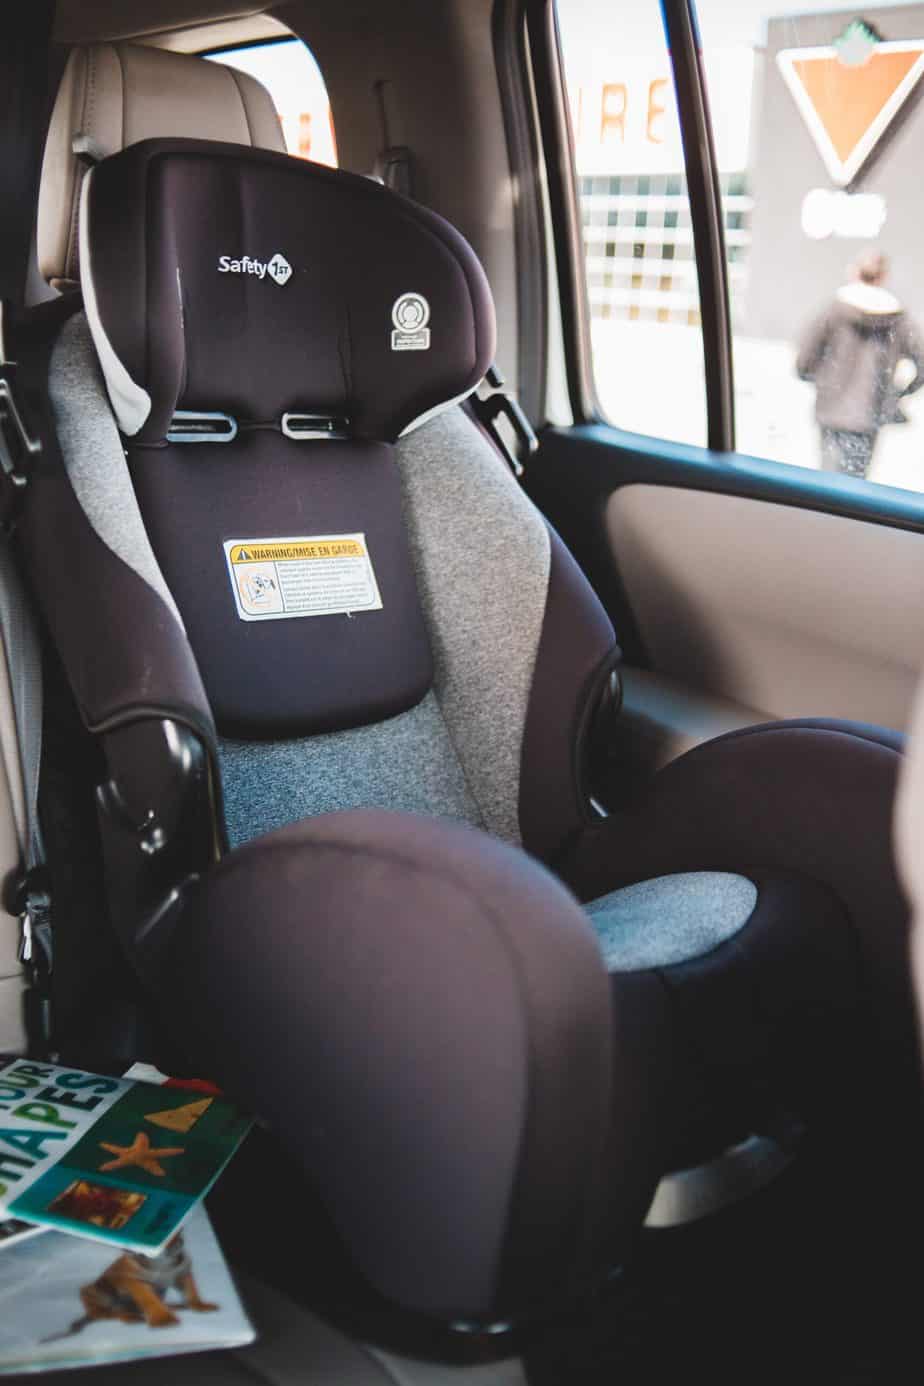 How To Install a Baby Trend Car Seat Base